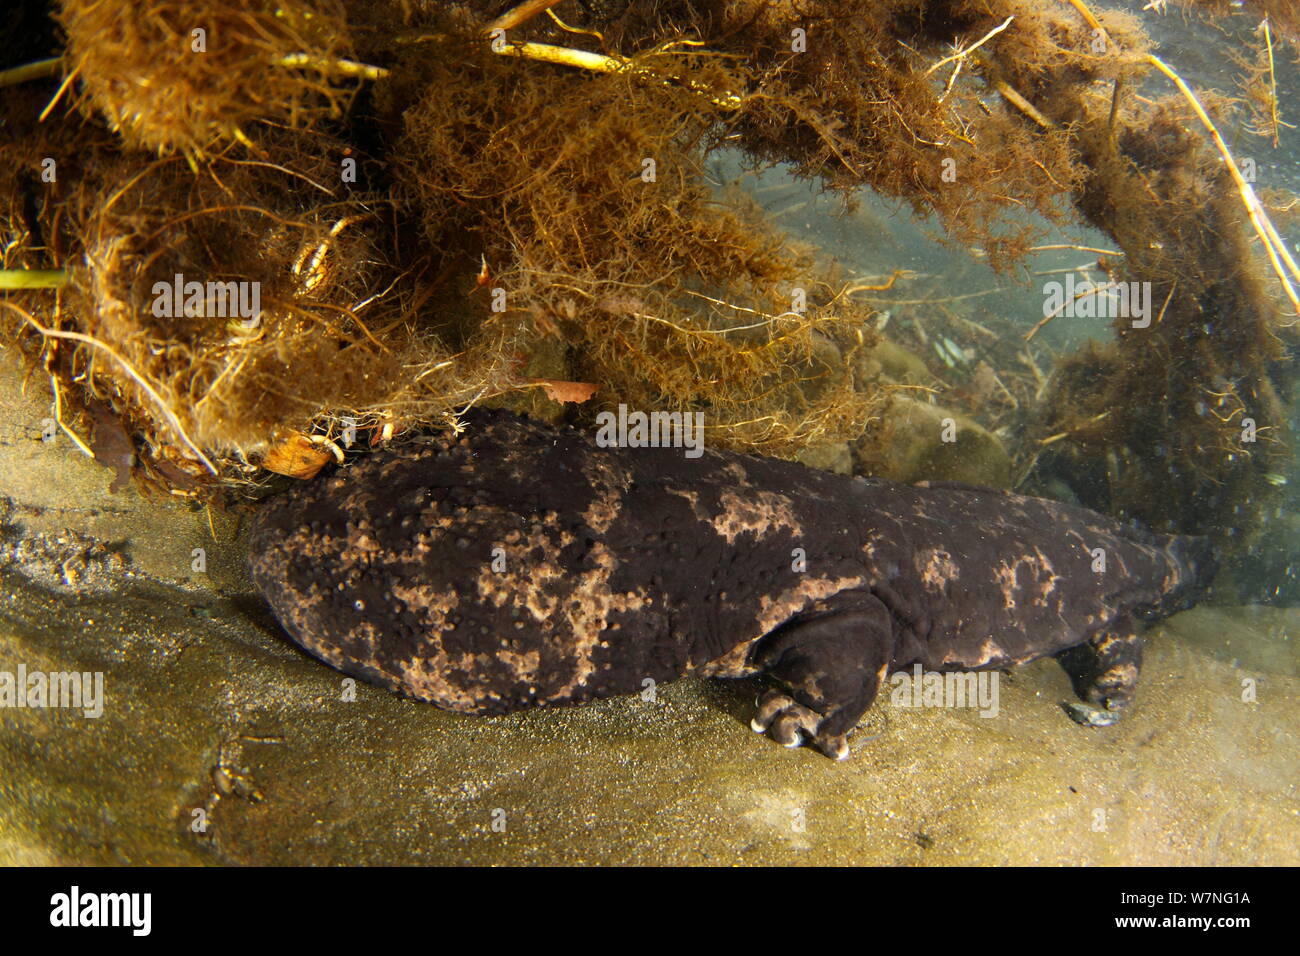 Japanese giant salamander (Andrias japonicus) in  river, Japan, January Stock Photo